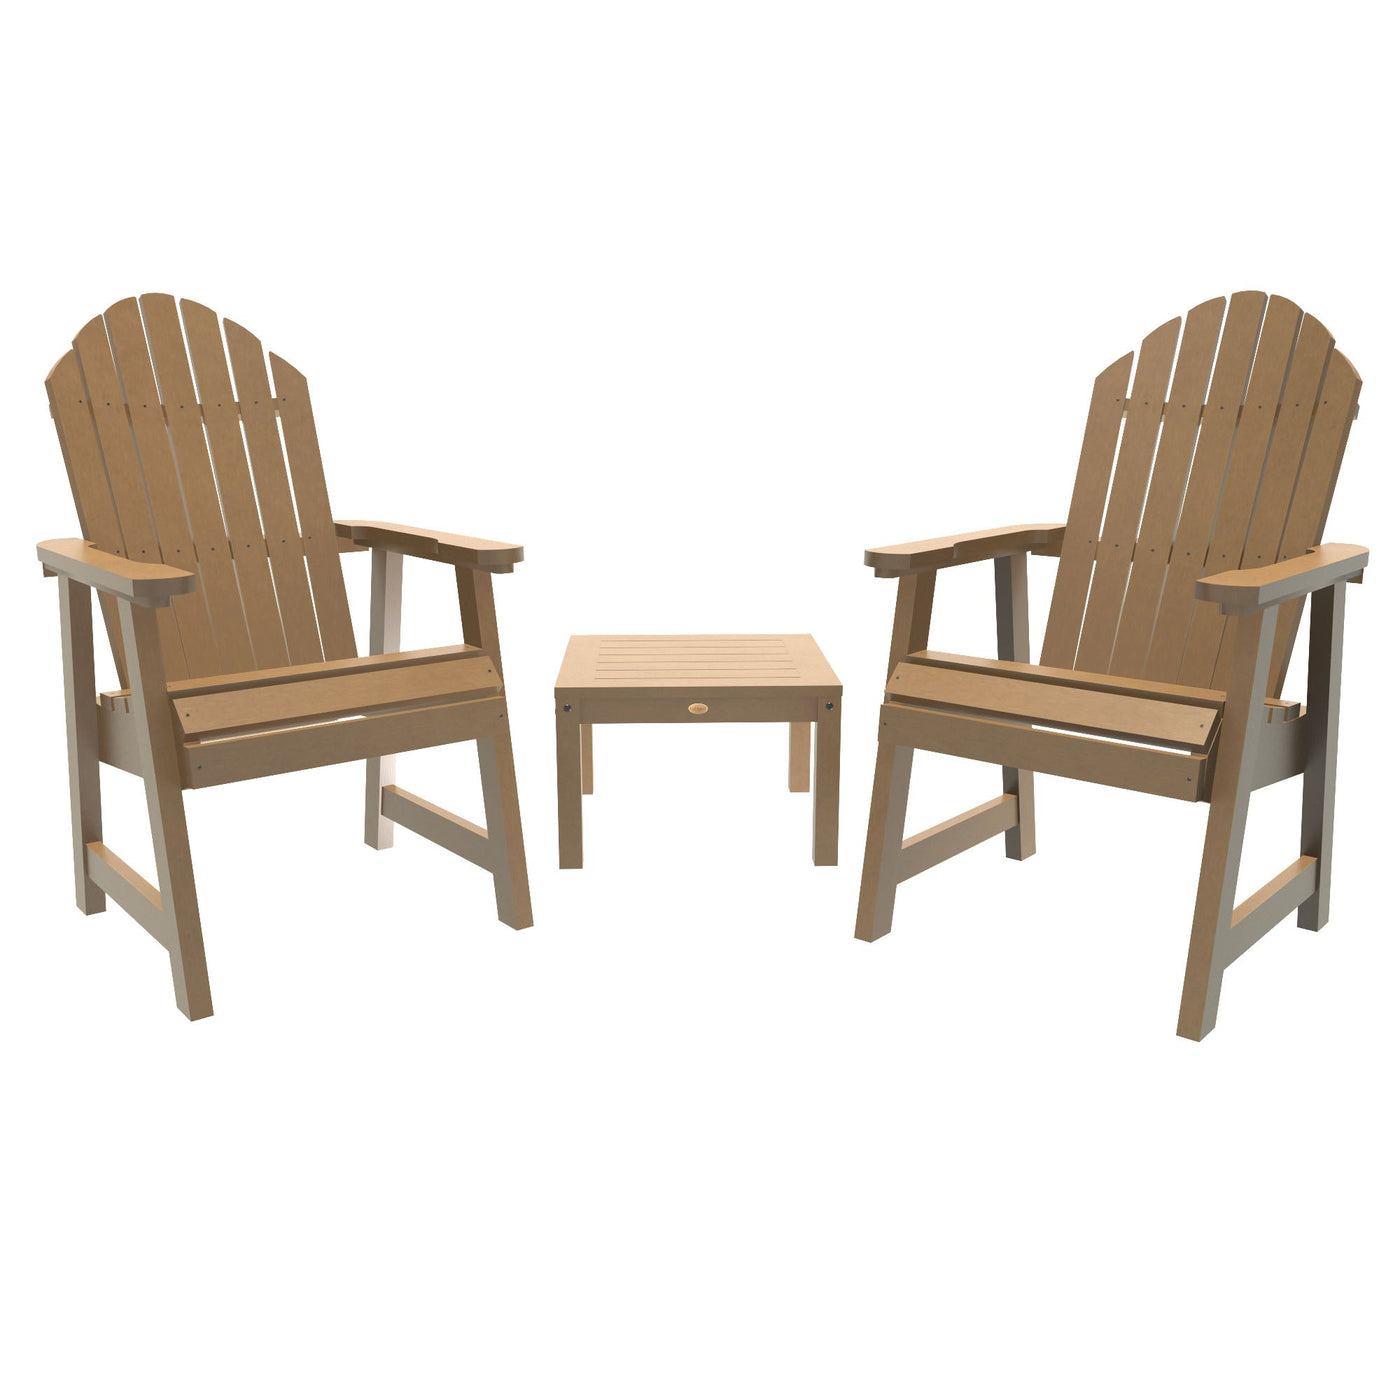 2 Hamilton Deck Chairs with Adirondack Side Table Highwood USA Toffee 